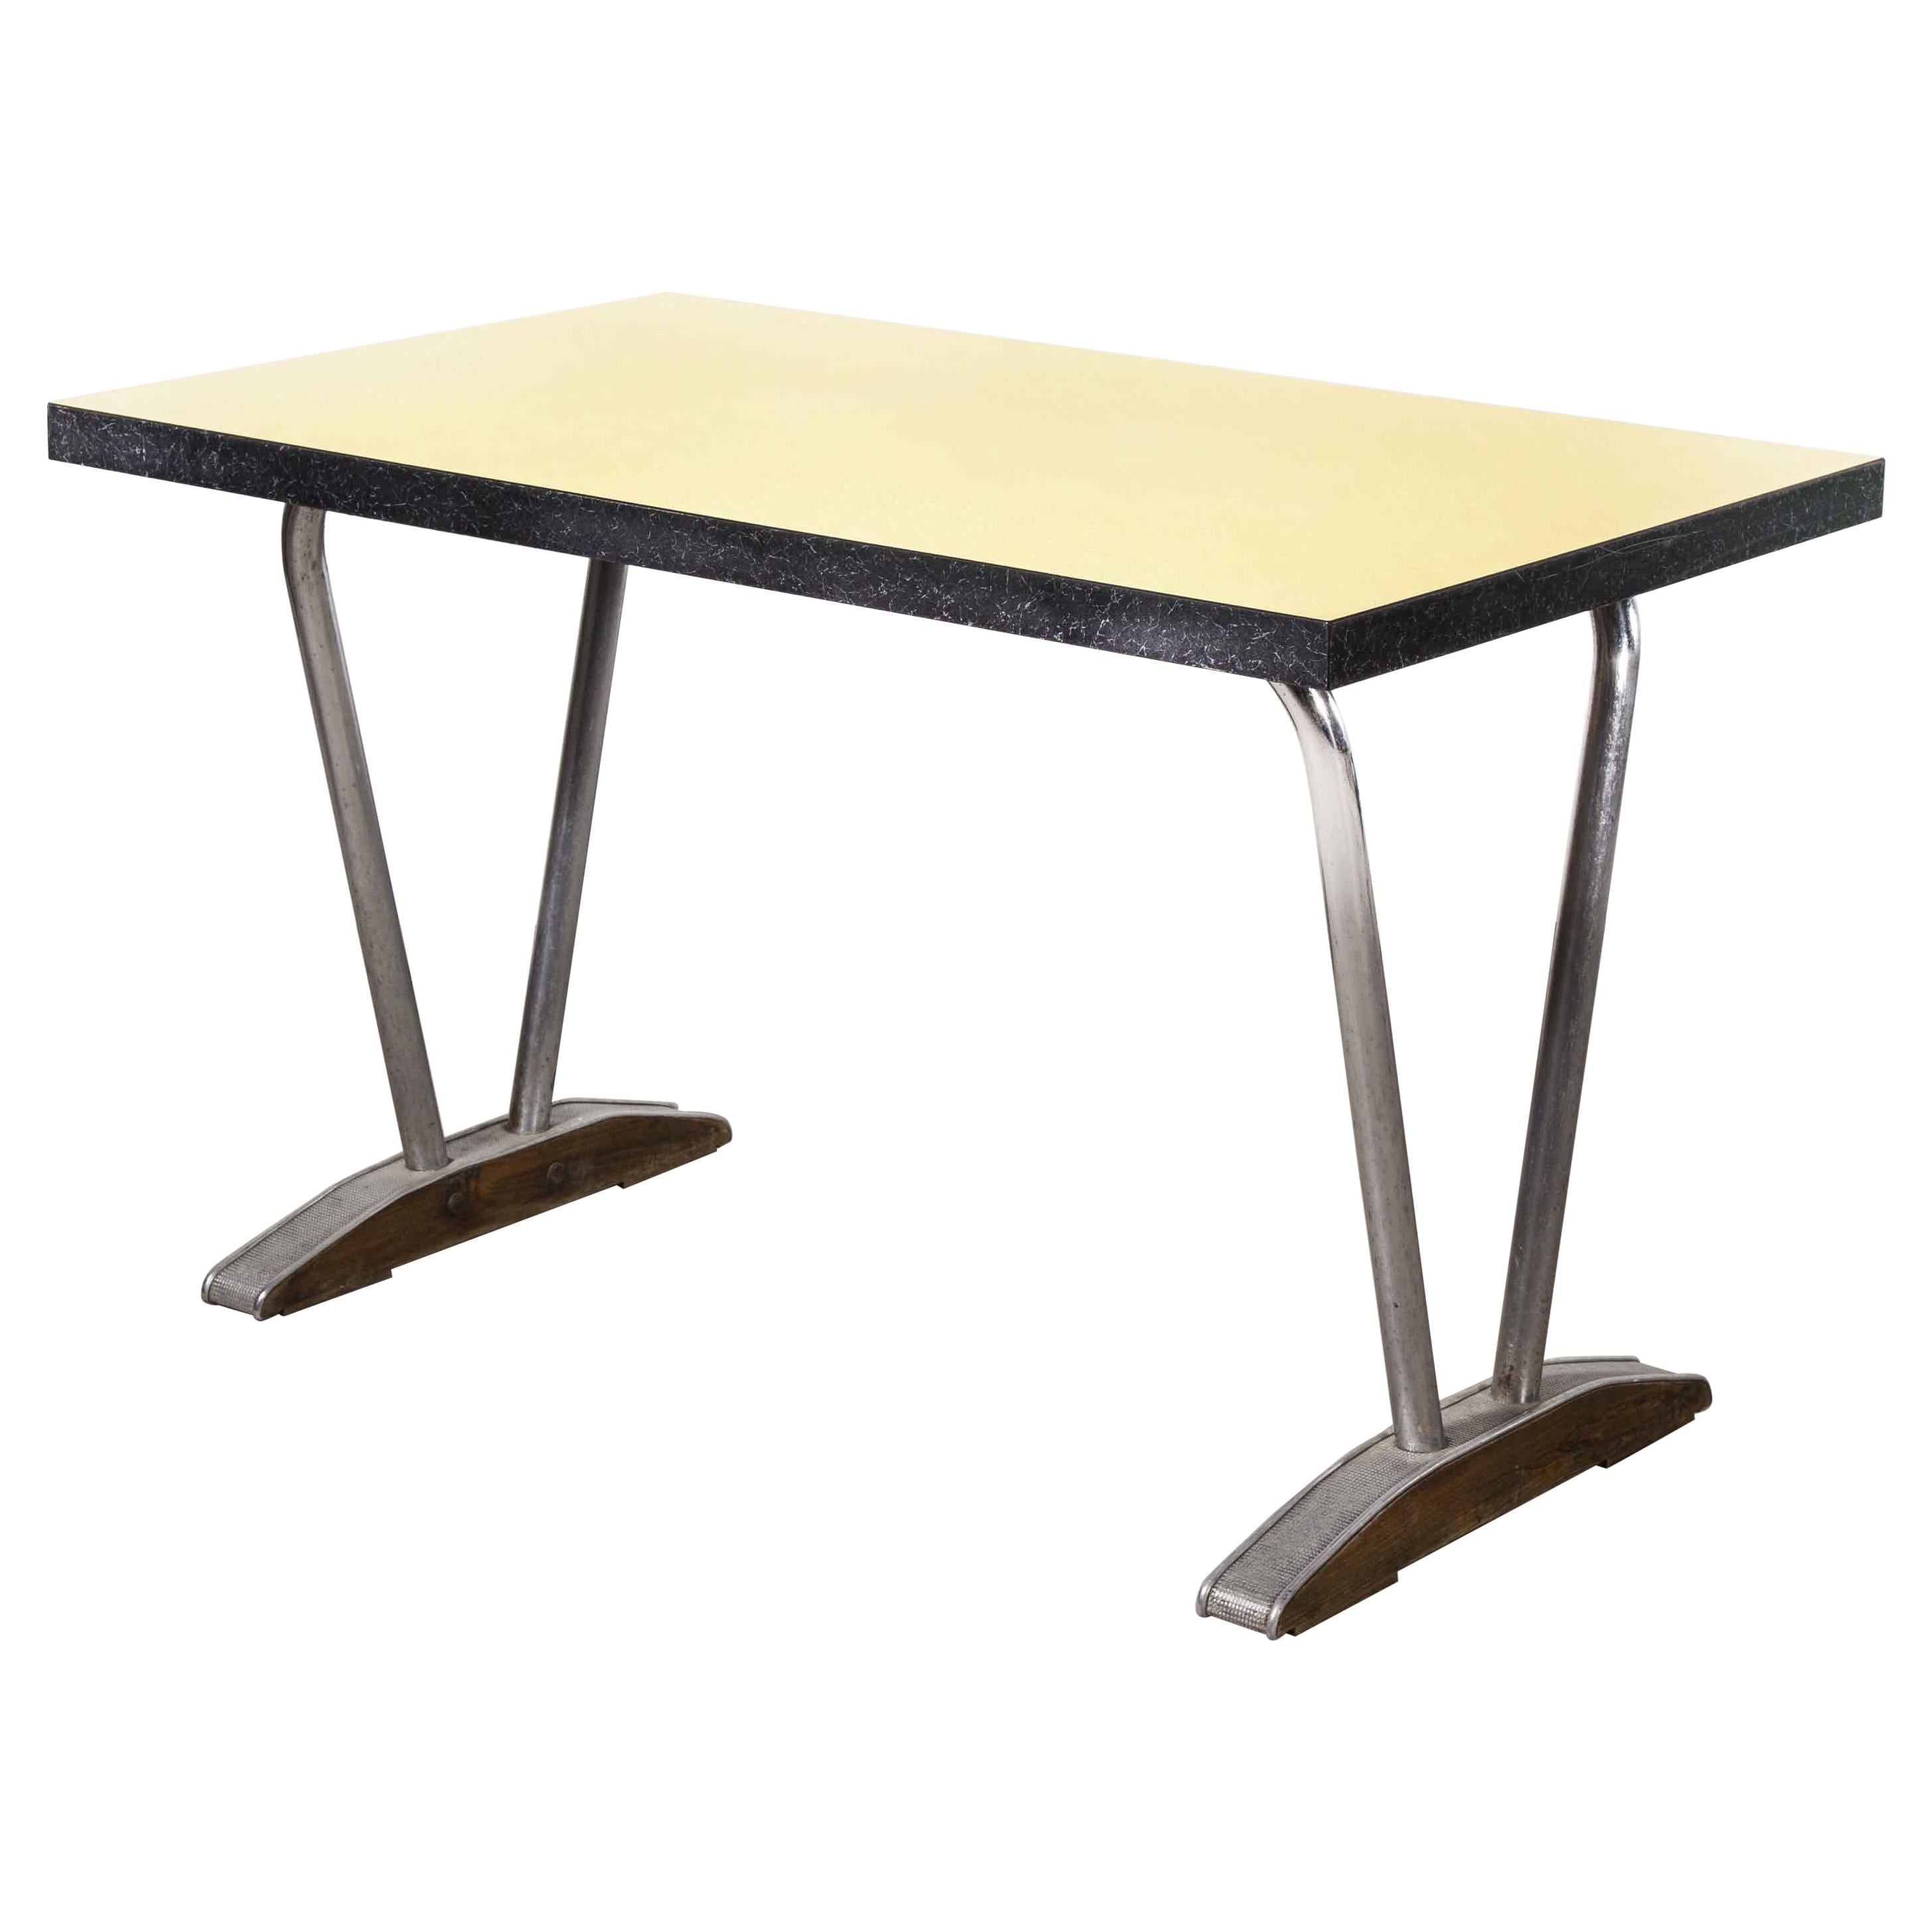 1960’s French Yellow Laminate Dining Table with Aluminium Base, 'Model 779.1'